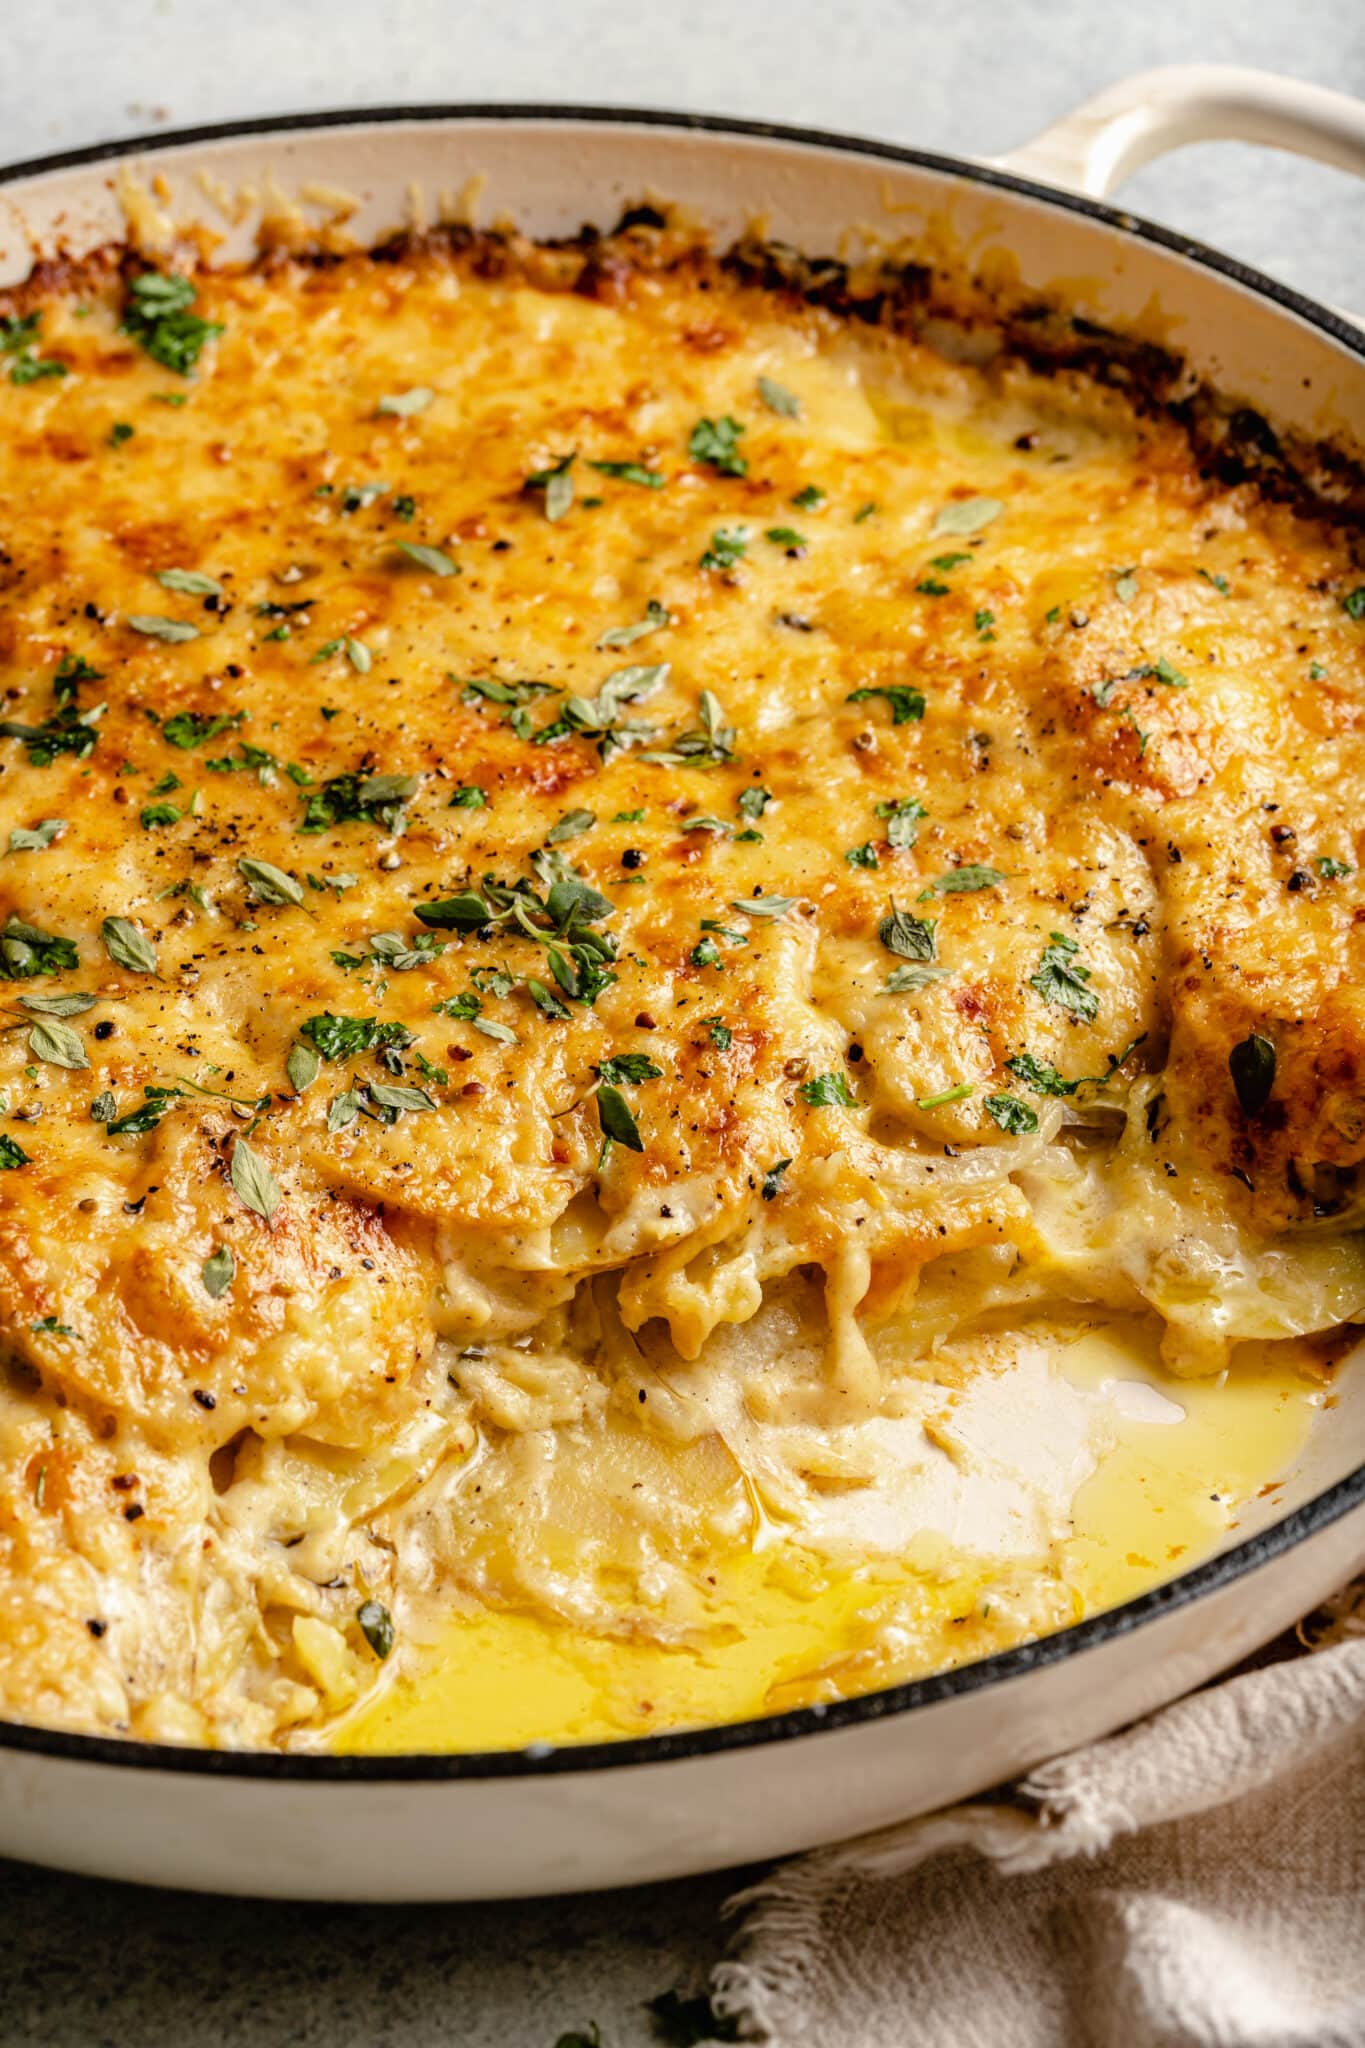 Cheesy Au Gratin Potatoes - All the Healthy Things